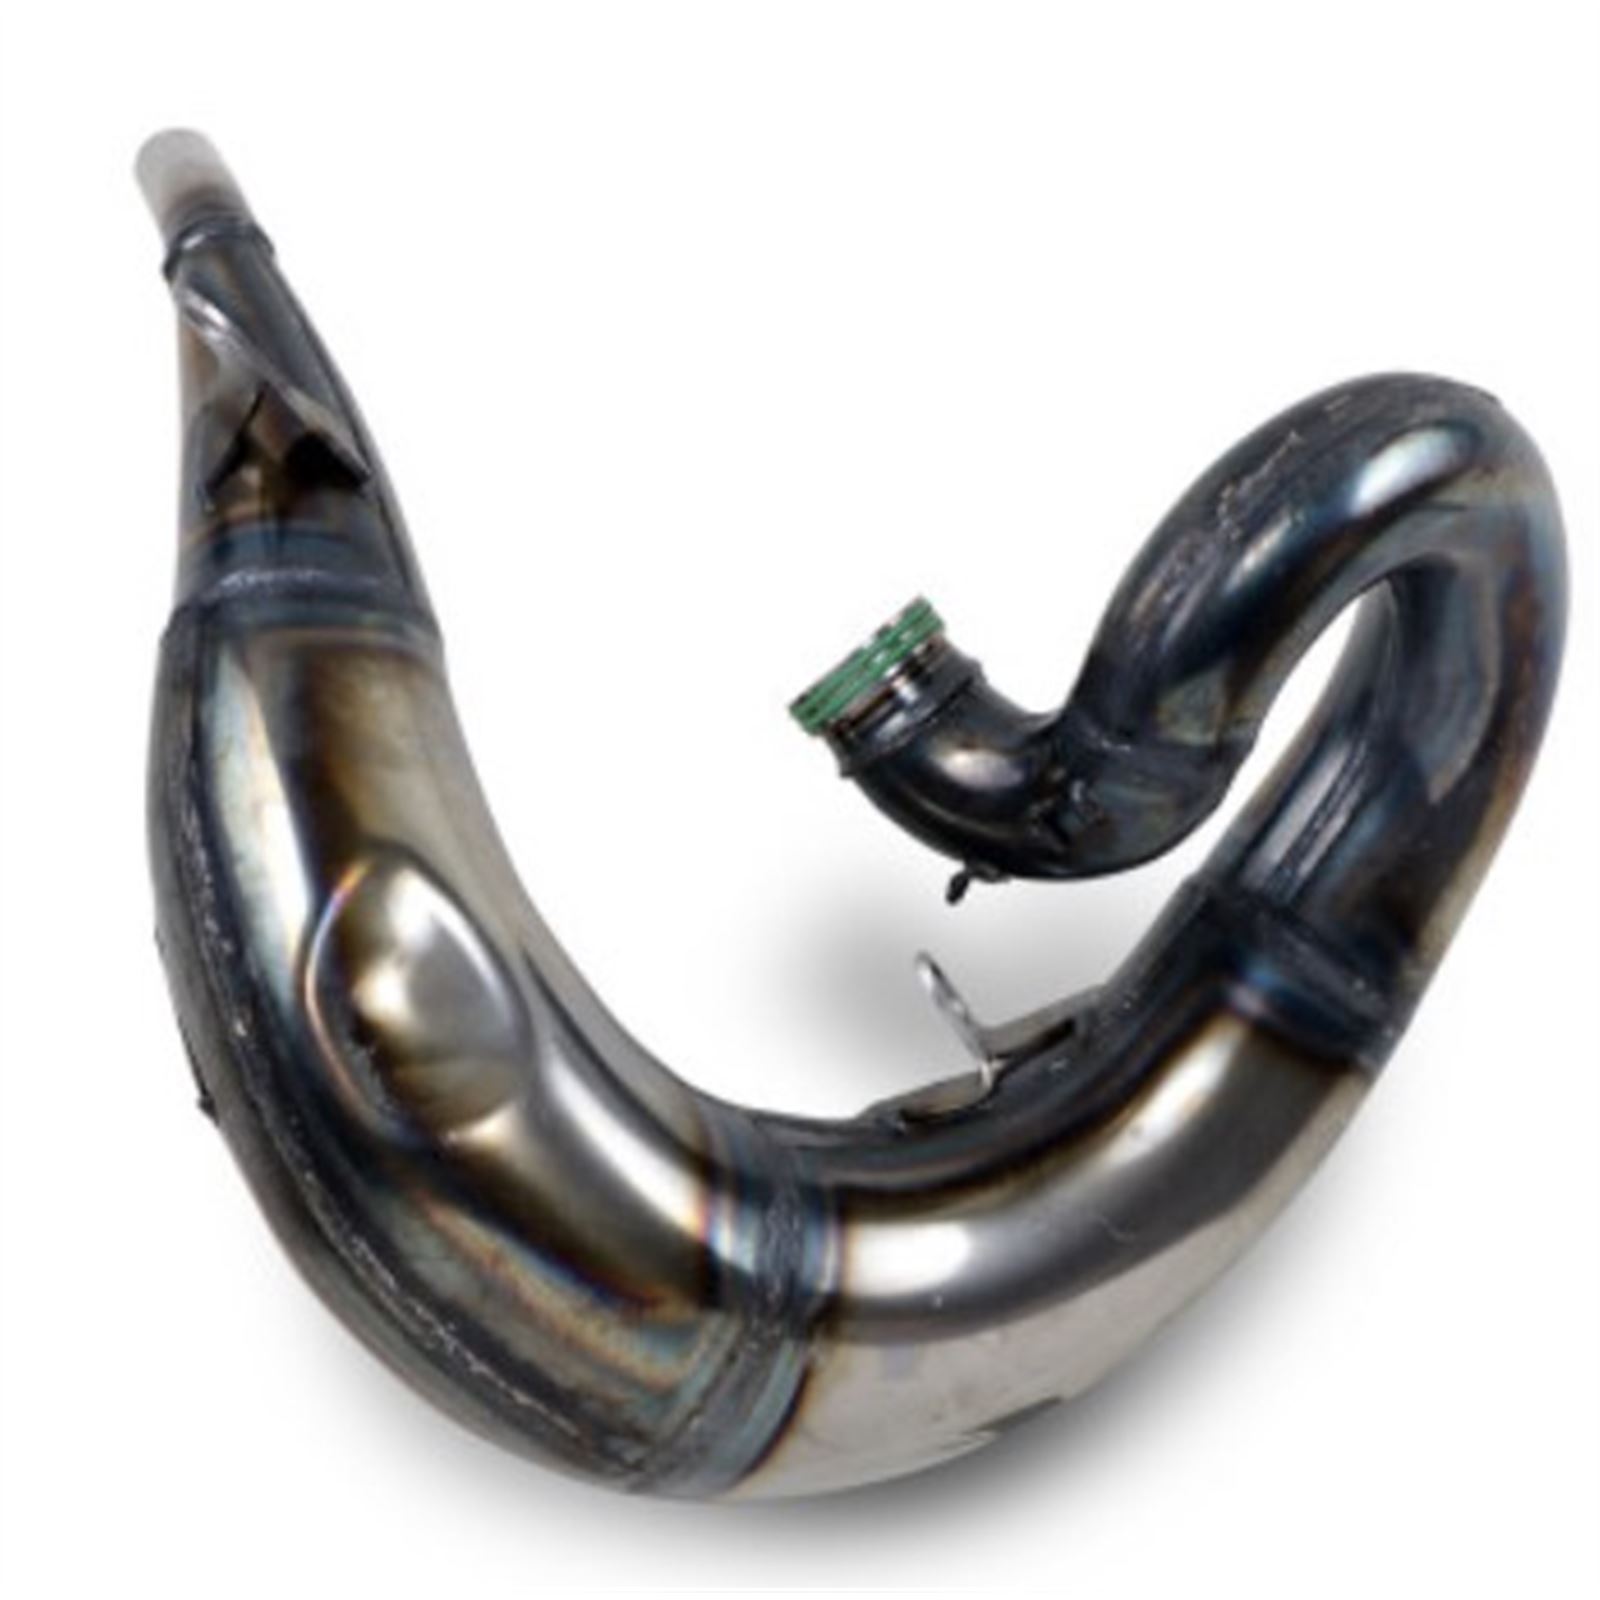 FMF Racing Factory Fatty Pipe